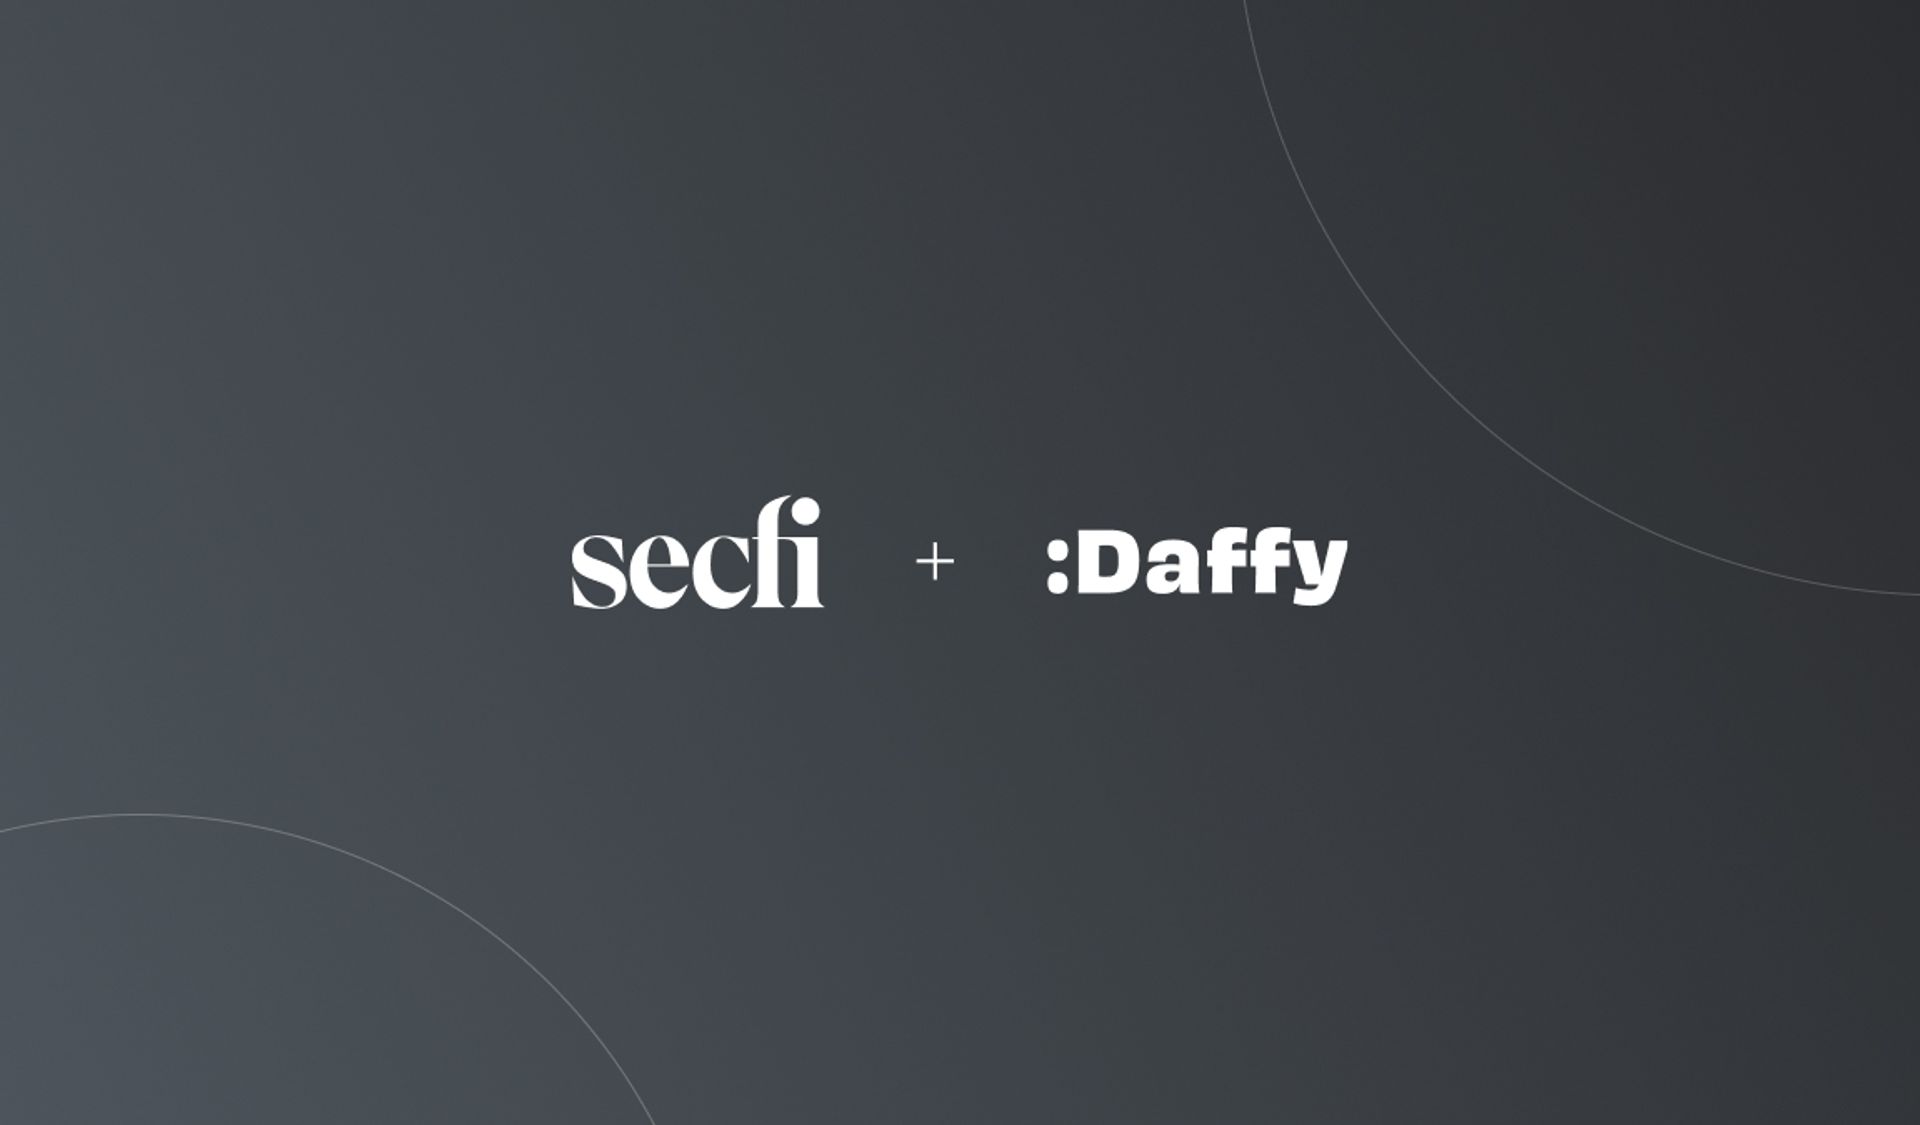 Secfi and Daffy logos to announce our partnership